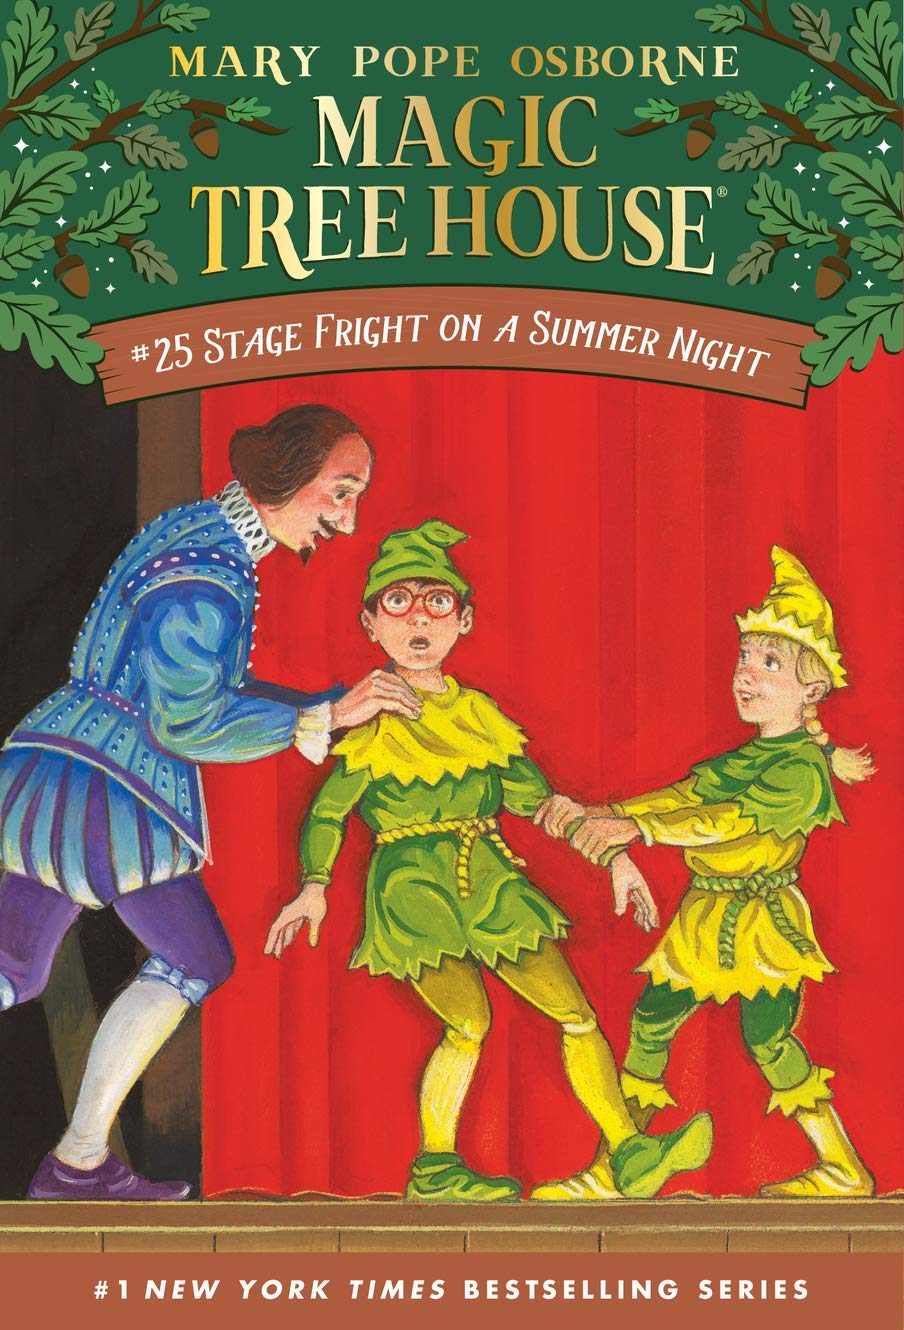 Magic Tree House: Stage Fright on a Summer's Night (#25)